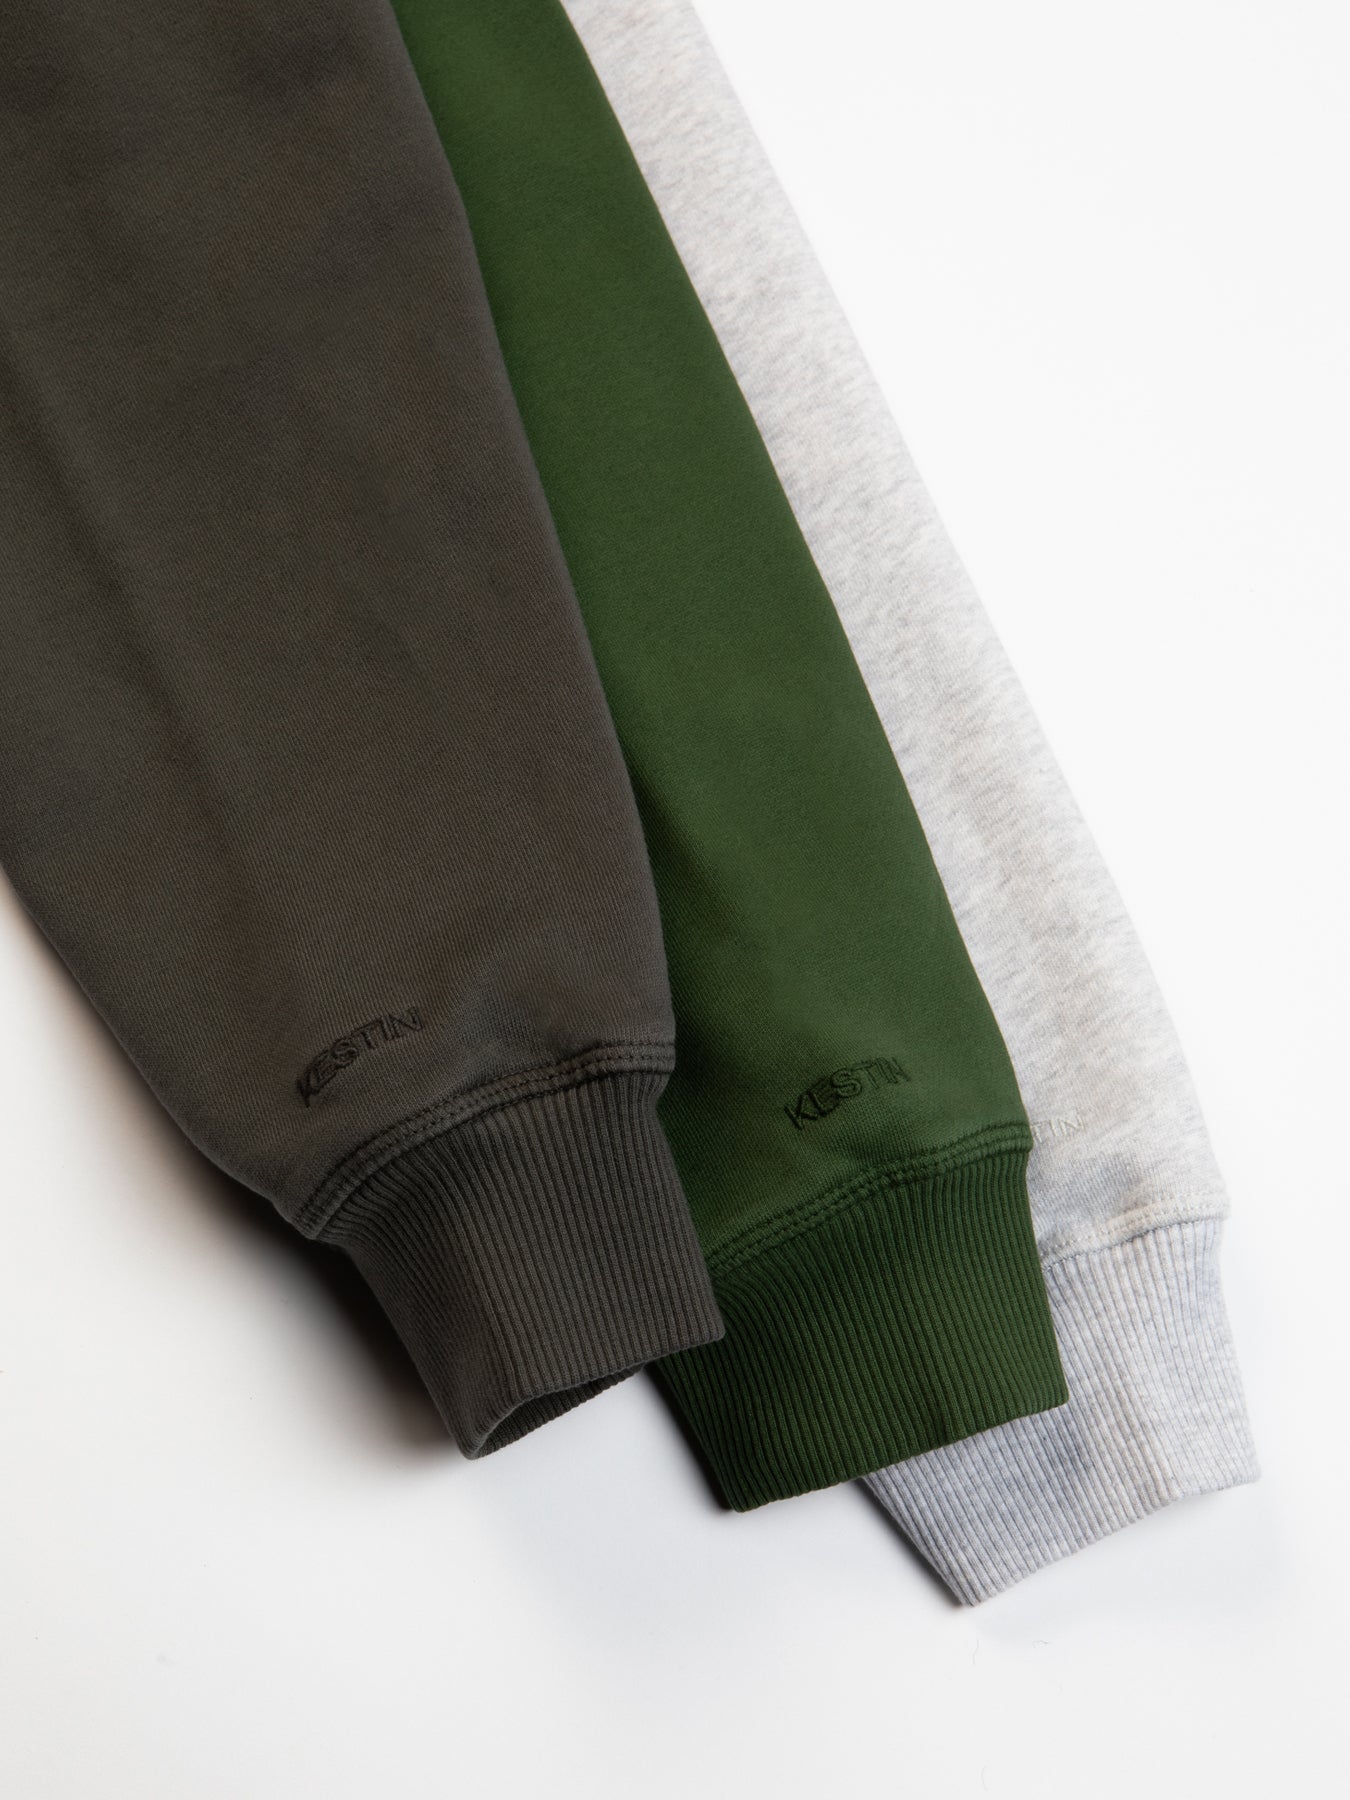 Three ribbed cuffs and sleeves from the KESTIN St Andrews Hoodies.